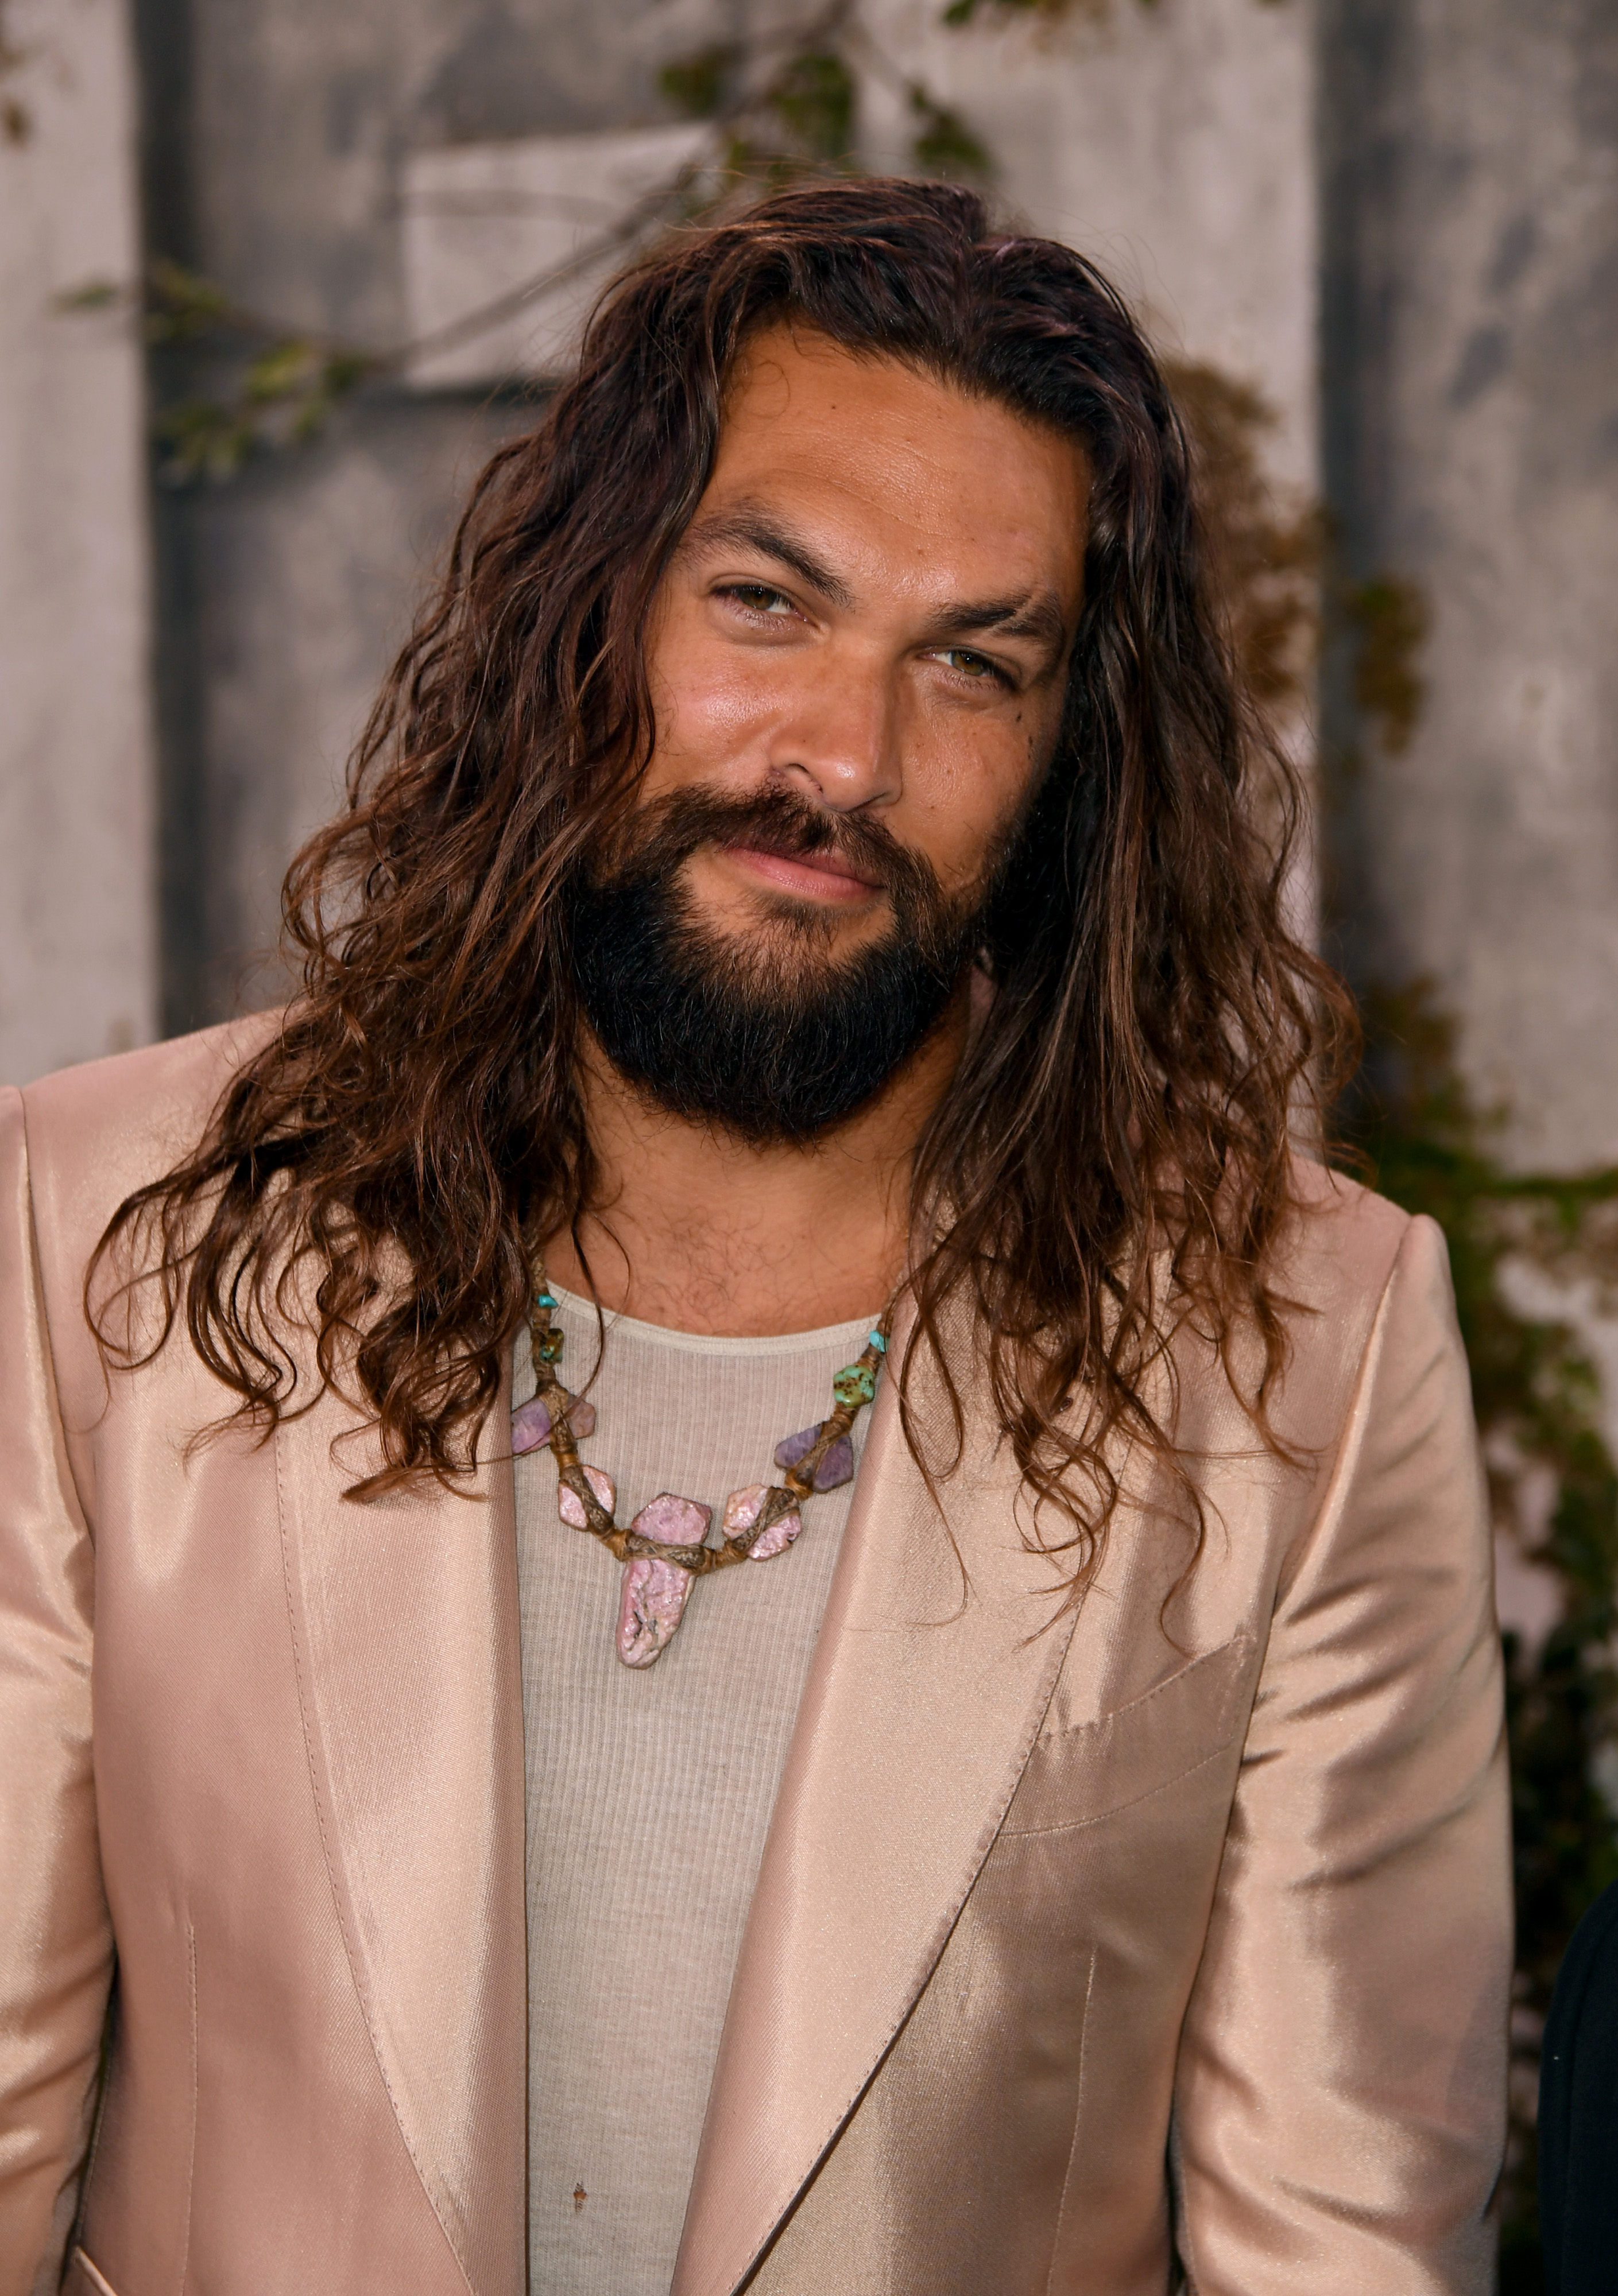 Jason Momoa attends the premiere of "See" on October 21, 2019 in Los Angeles, California | Source: Getty Images